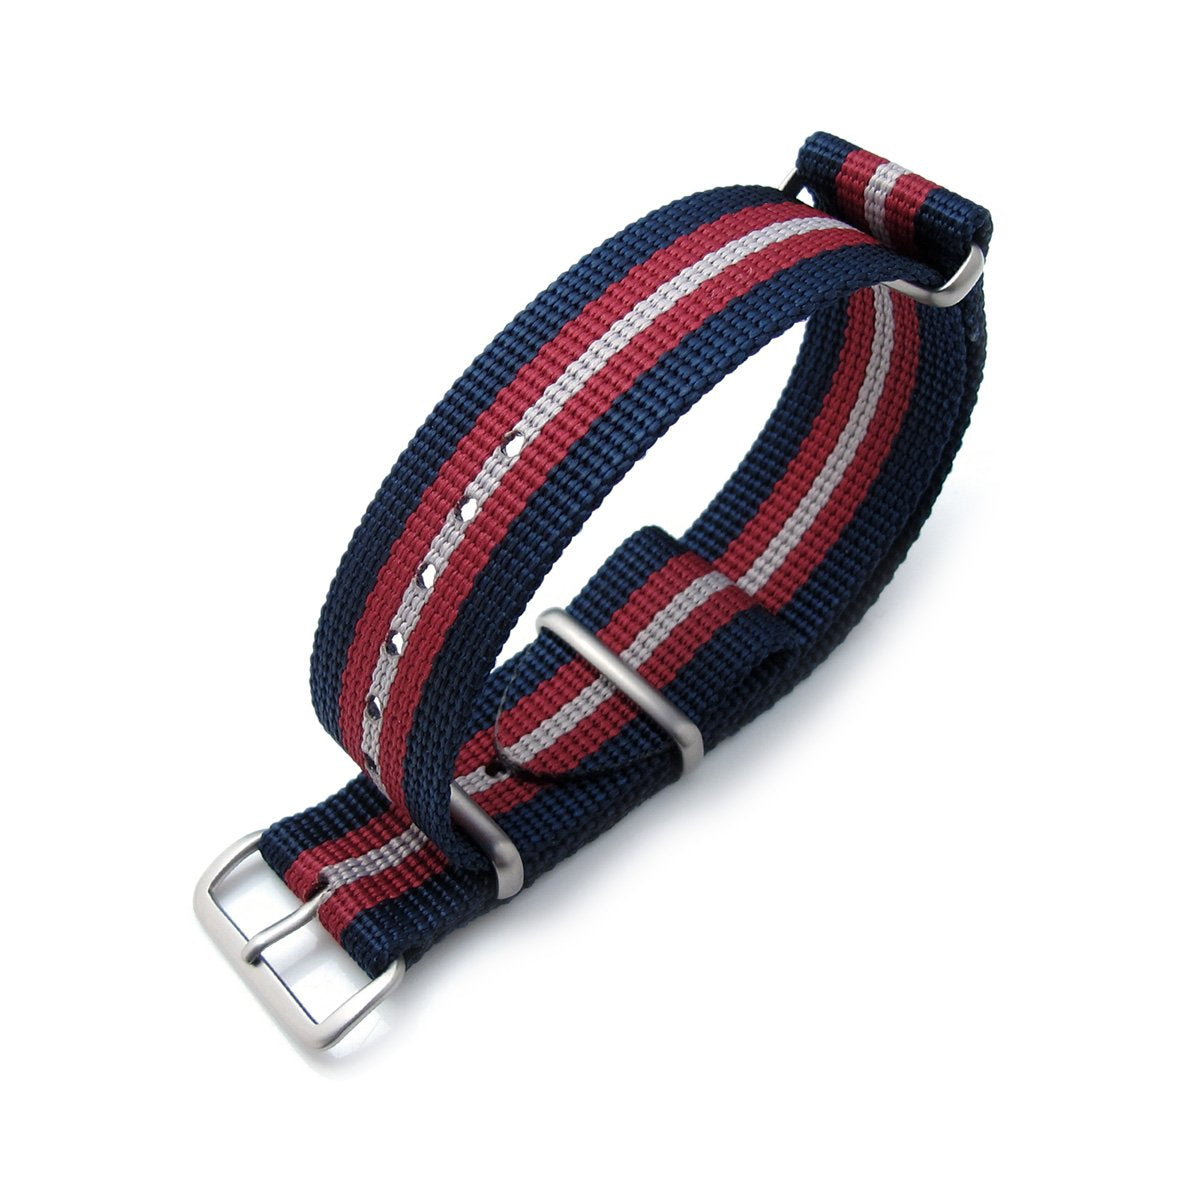 MiLTAT 20mm 21mm or 22mm G10 NATO Bullet Tail Watch Strap Ballistic Nylon Brushed Blue Red & Grey Stripes Strapcode Watch Bands